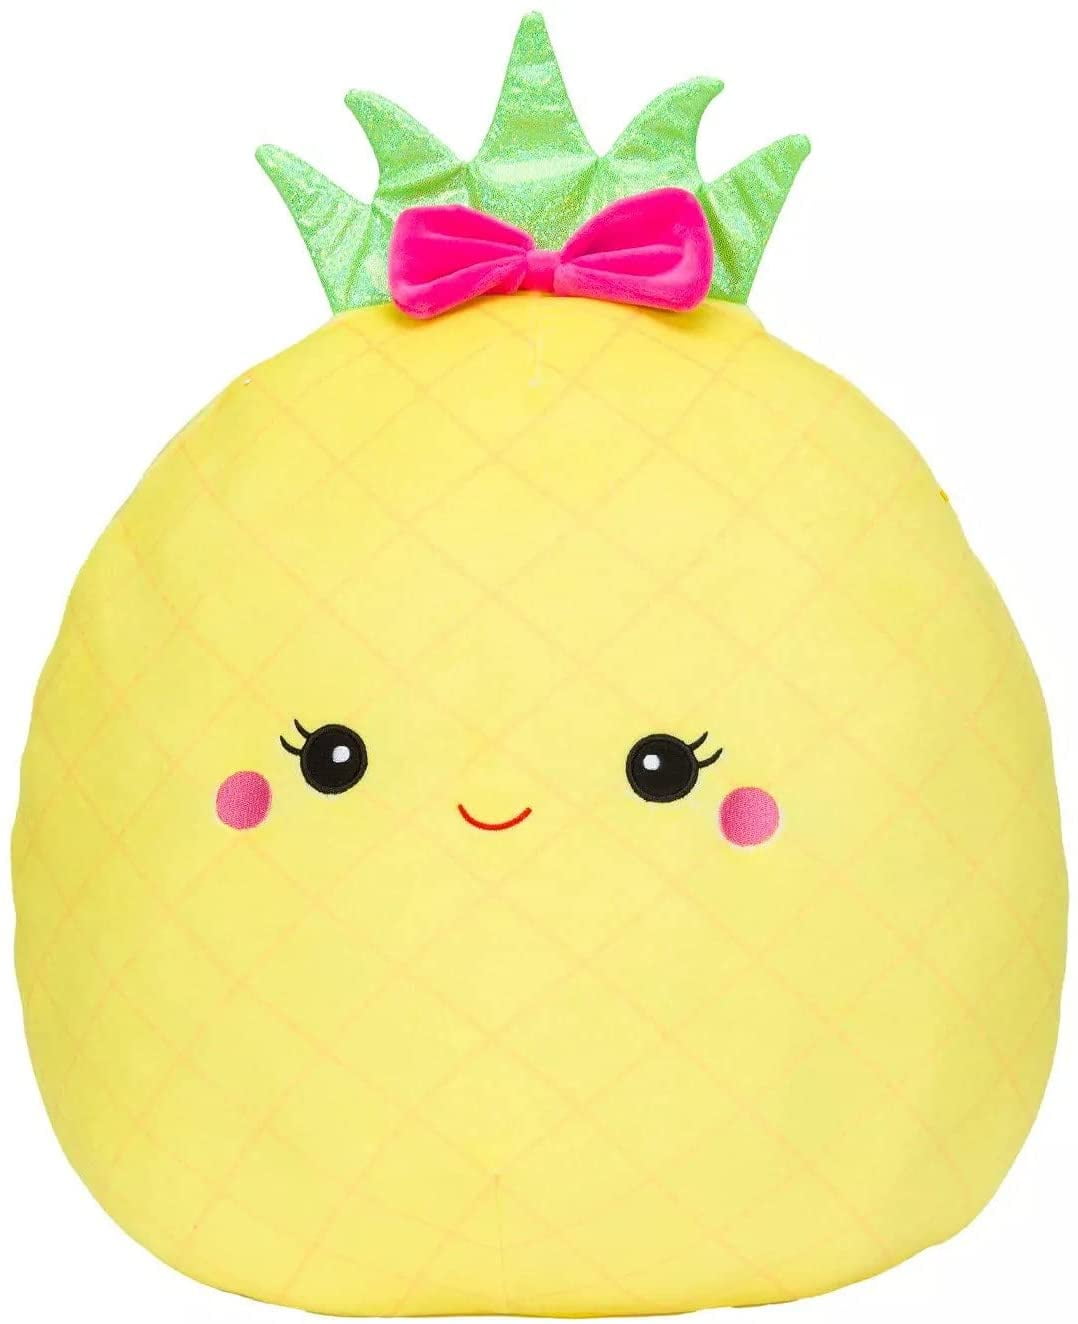 Squishmallows Maui Pineapple 16 inch Plush Toy for sale online 